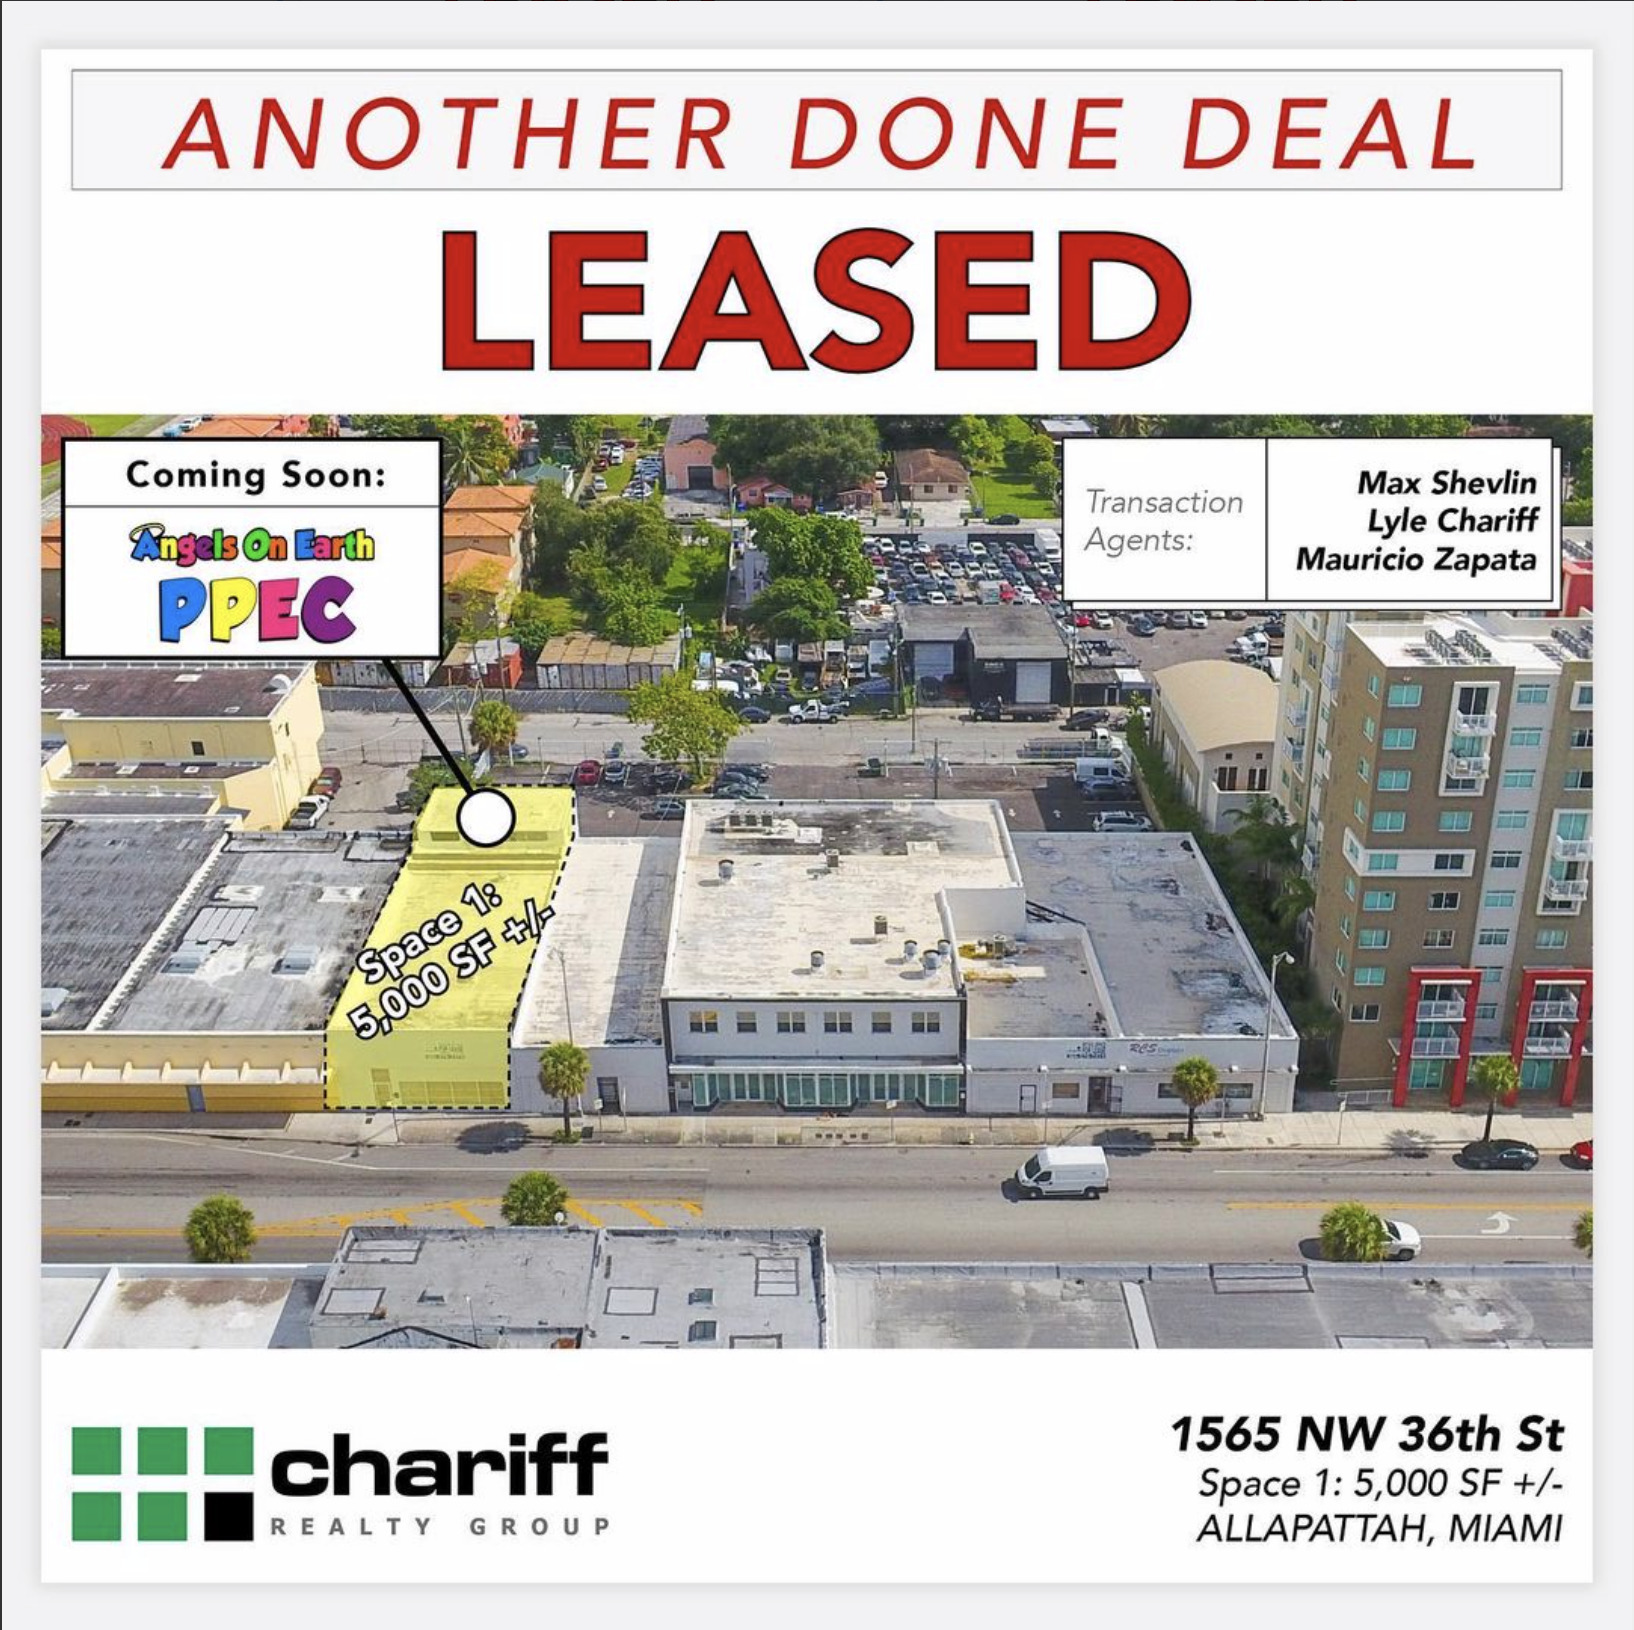 1565 NW 36th St - Another Done Deal - Miami - Allapatah - Leased - Chariff Realty Group